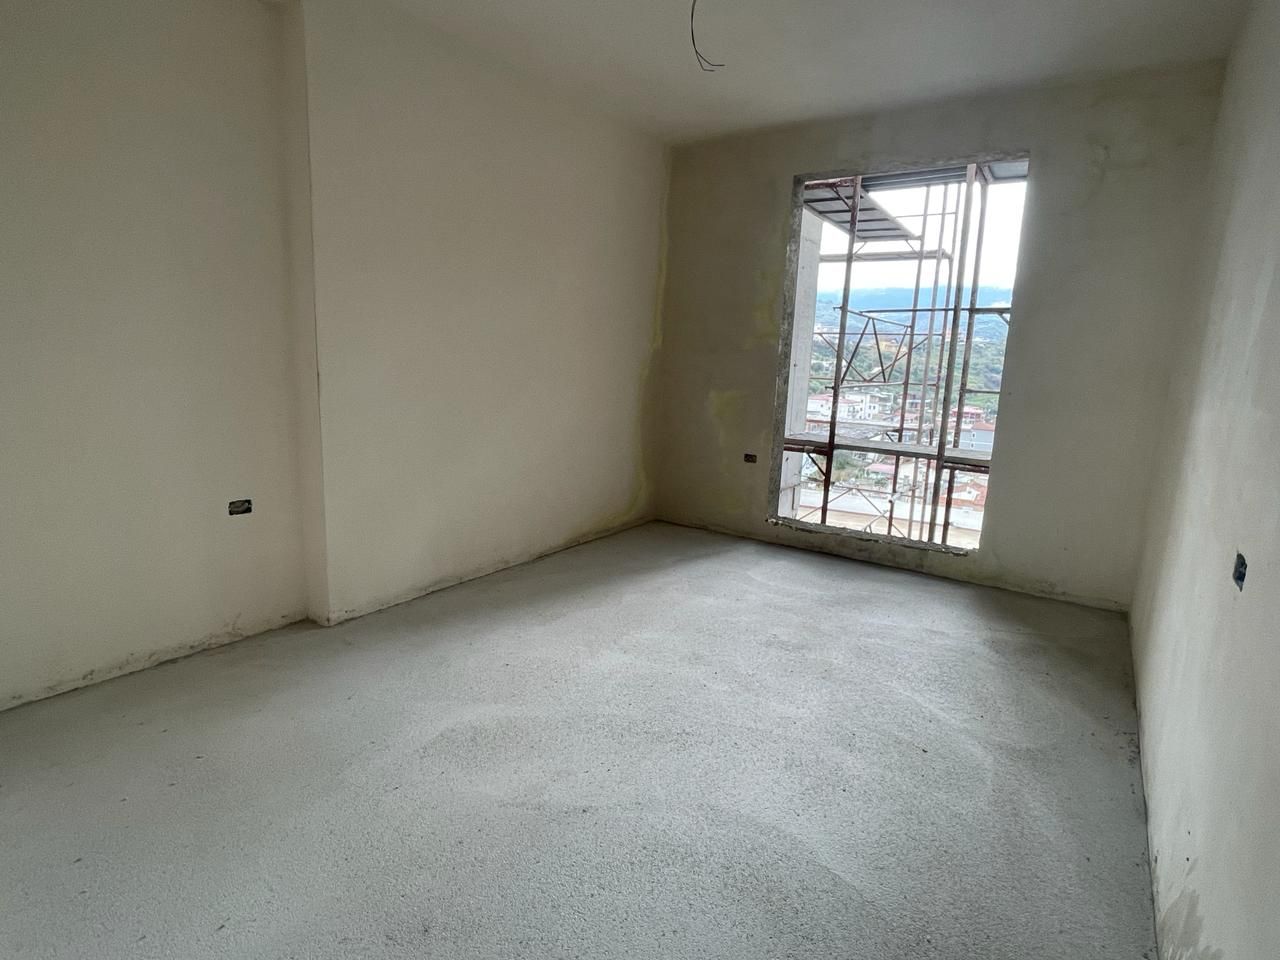 Apartment For Sale In Vlora, Situated In A Quiet Area, Near The City Center, With All The Facilities Nearby